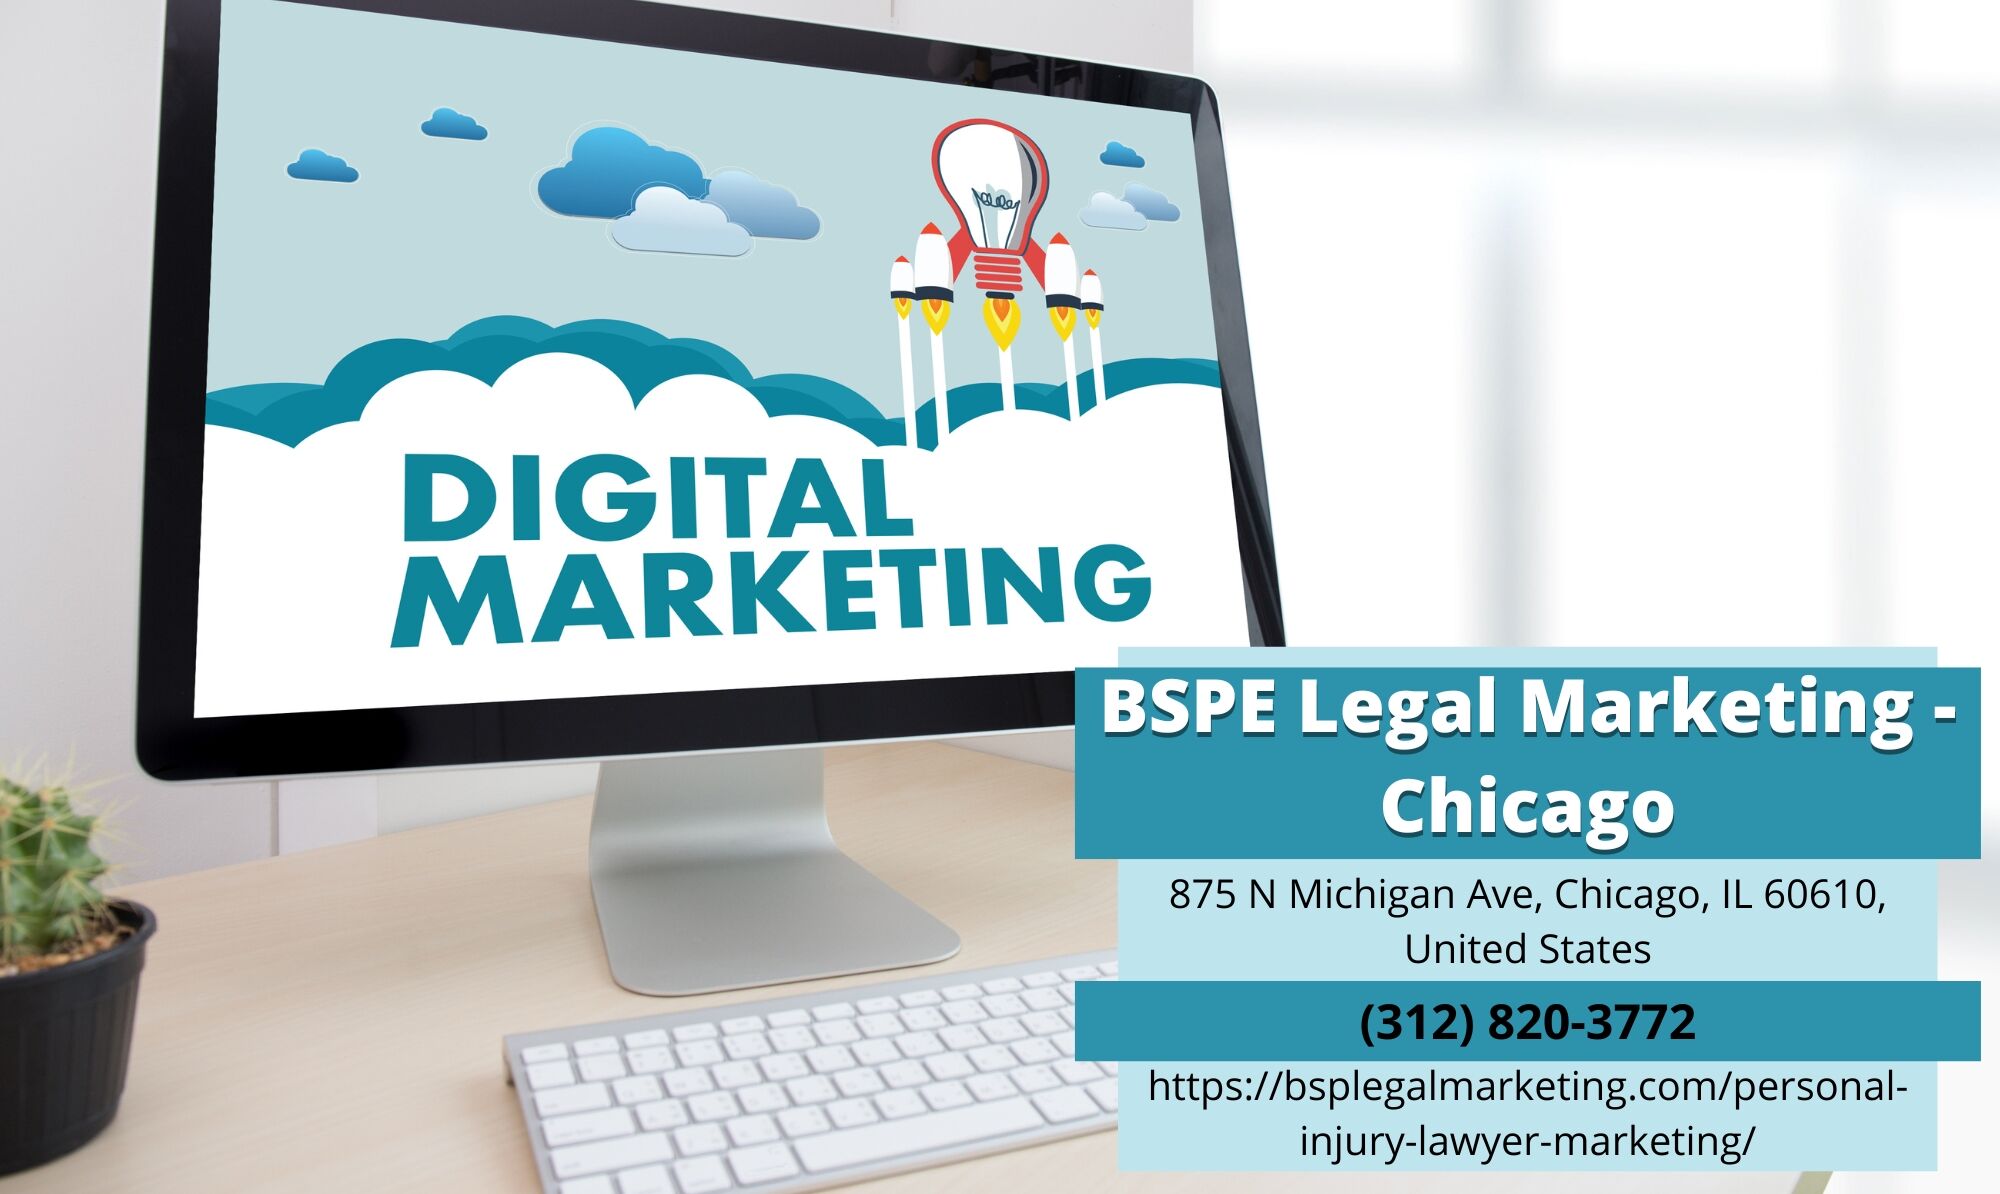 BSPE Legal Marketing Releases Comprehensive Guide About Personal Injury Lawyer Marketing